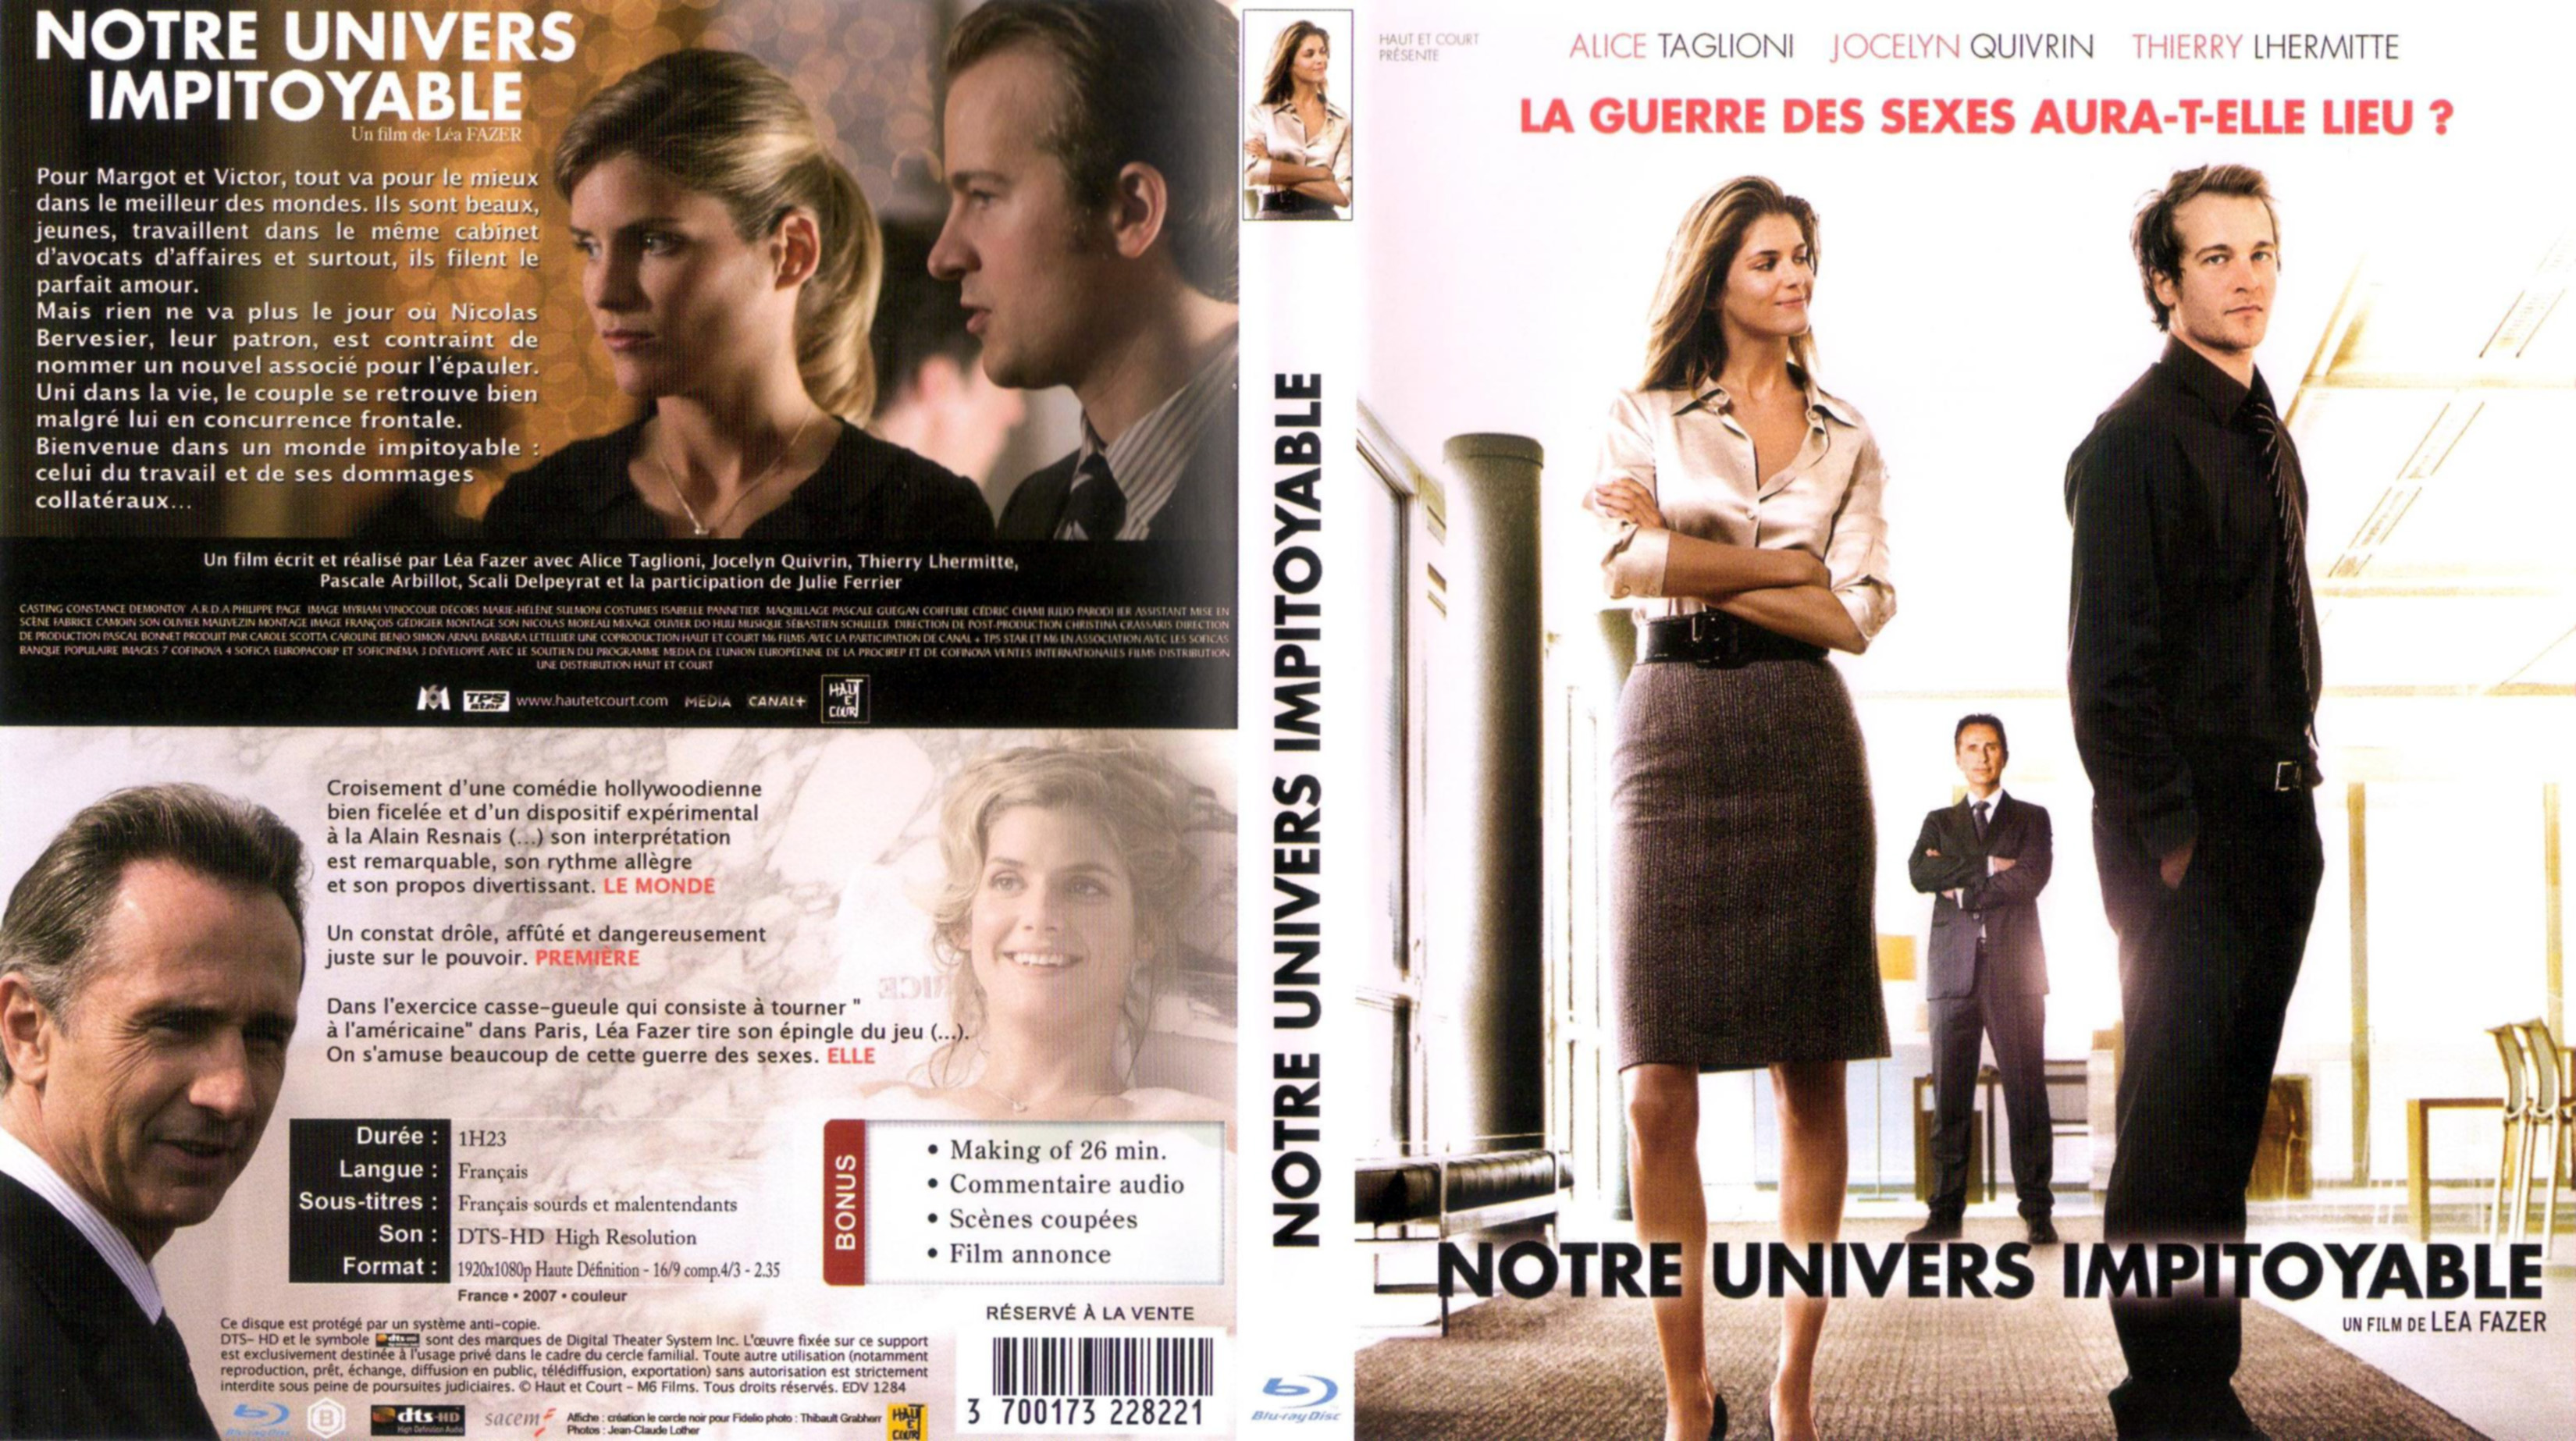 Jaquette DVD Notre univers impitoyable (BLU-RAY)